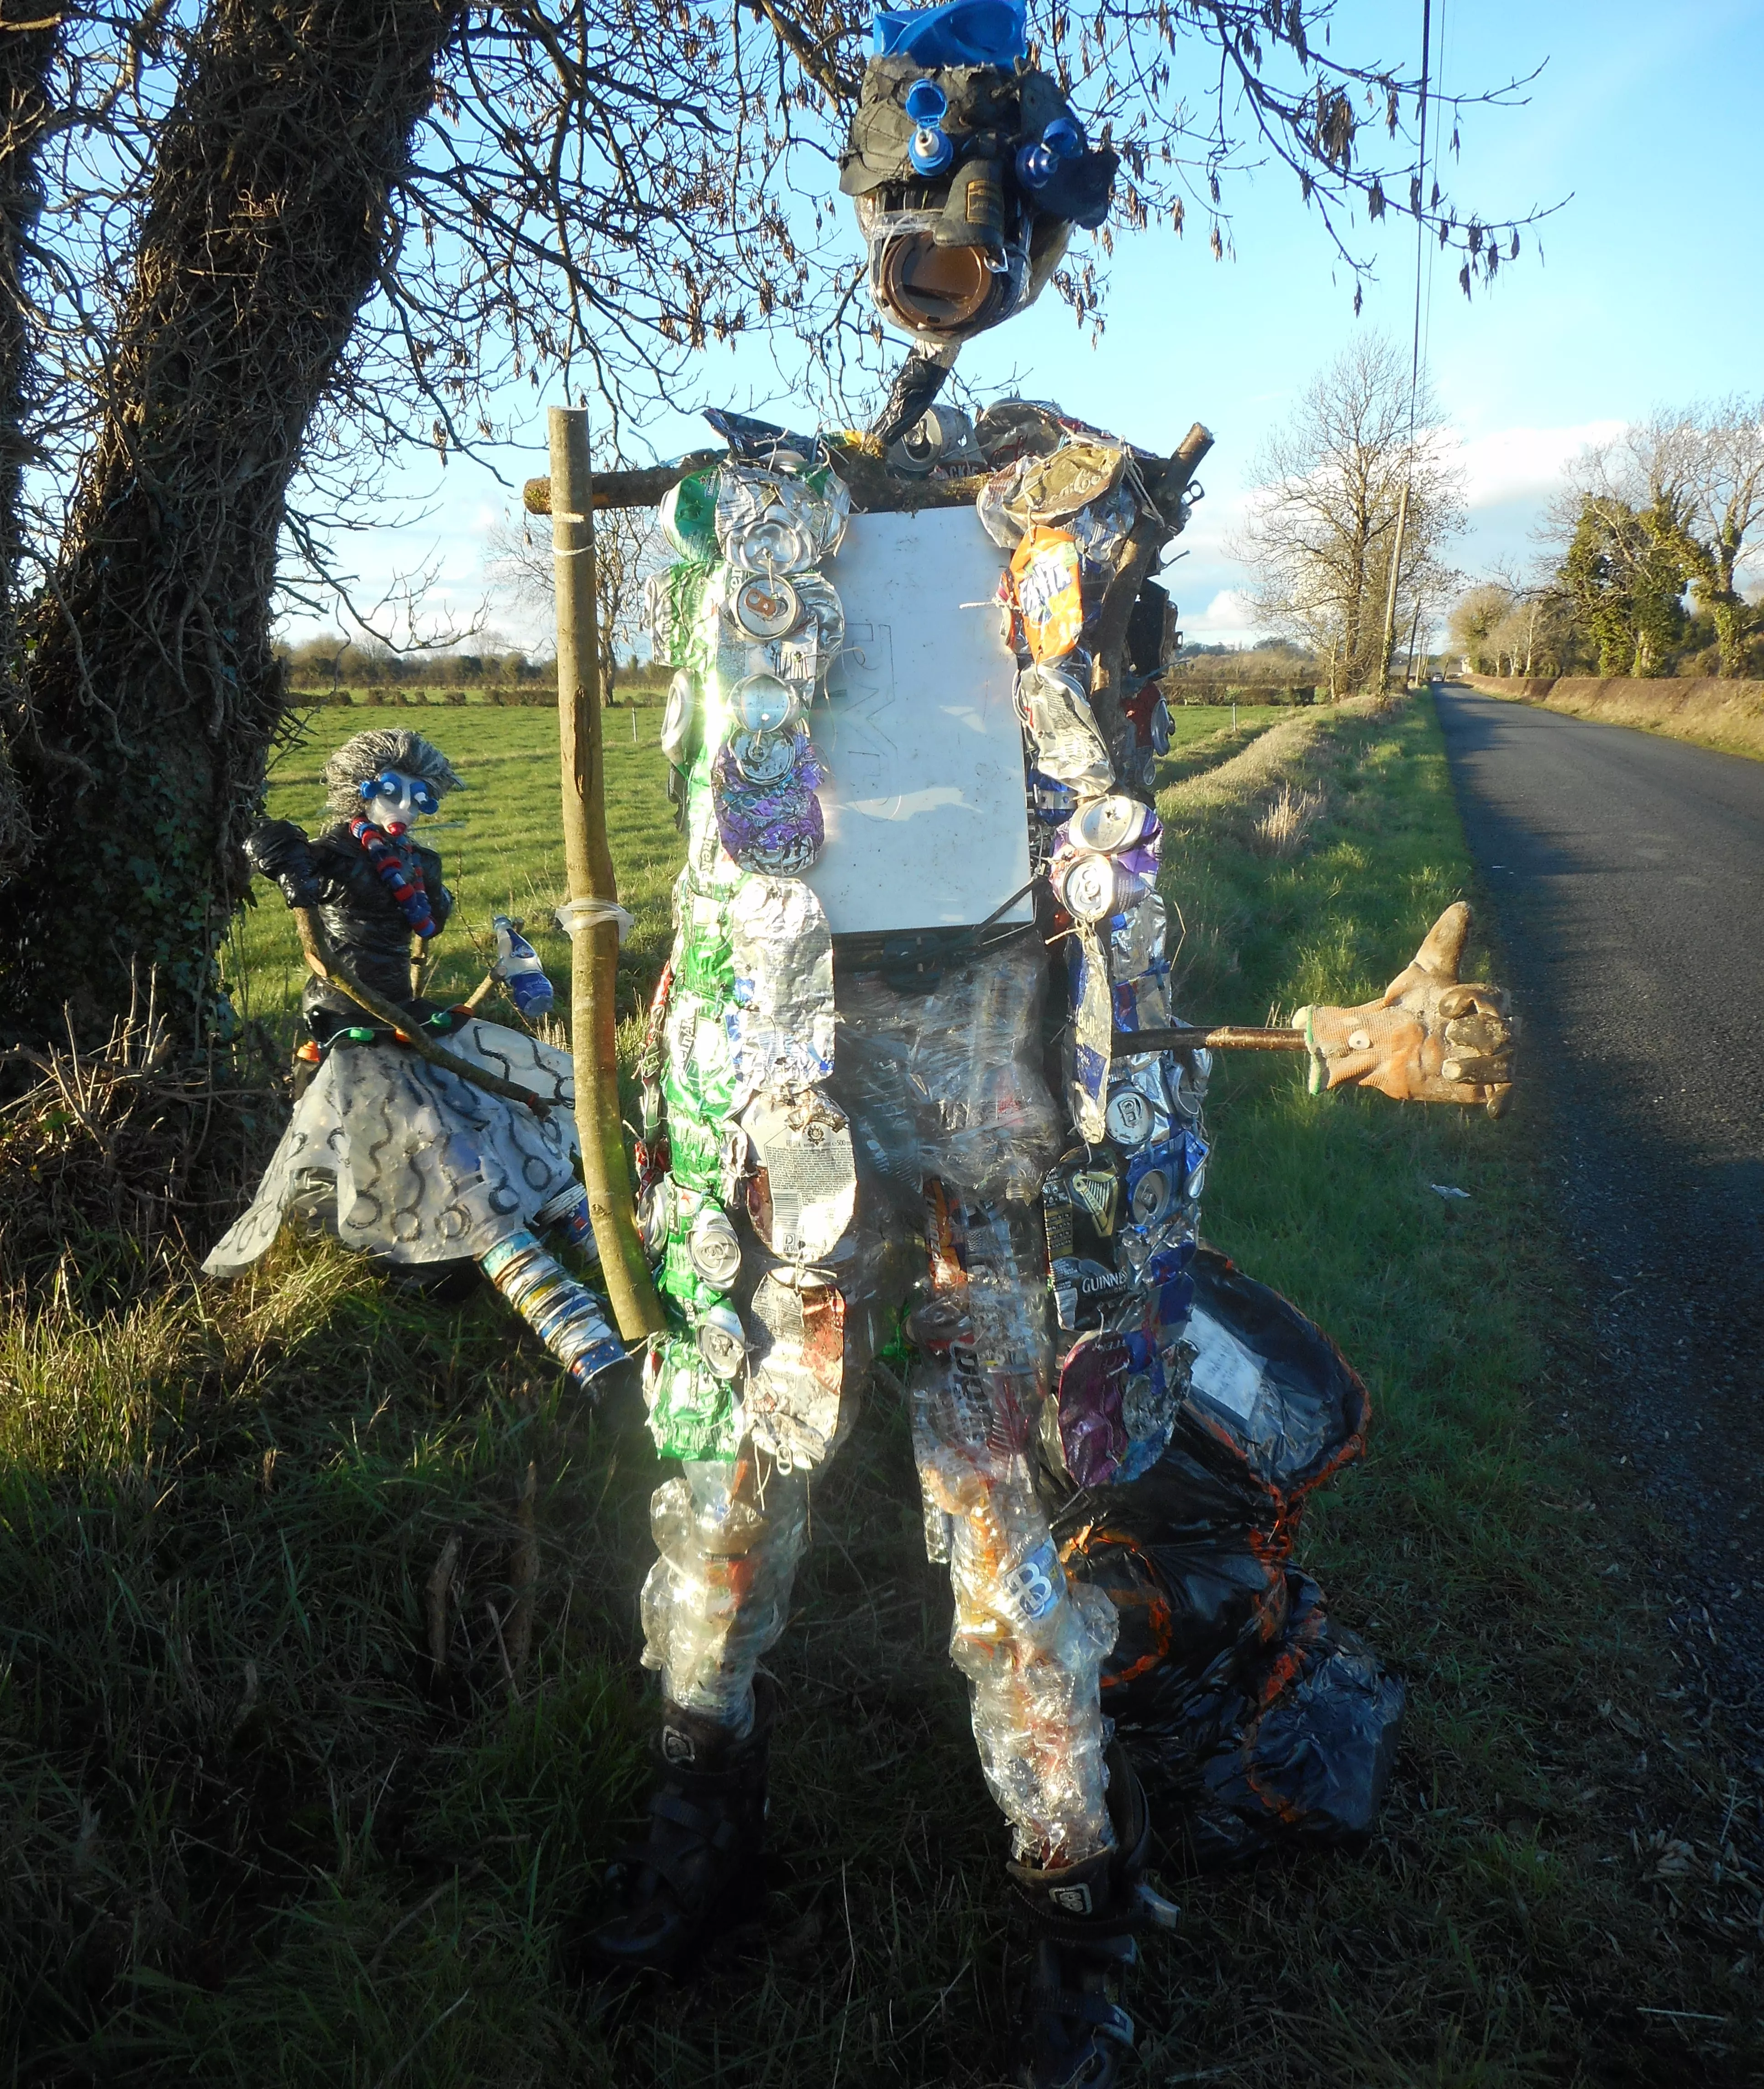 Artist uses 11 bags of rubbish picked up from roads in six hours to make sculptures in Meath